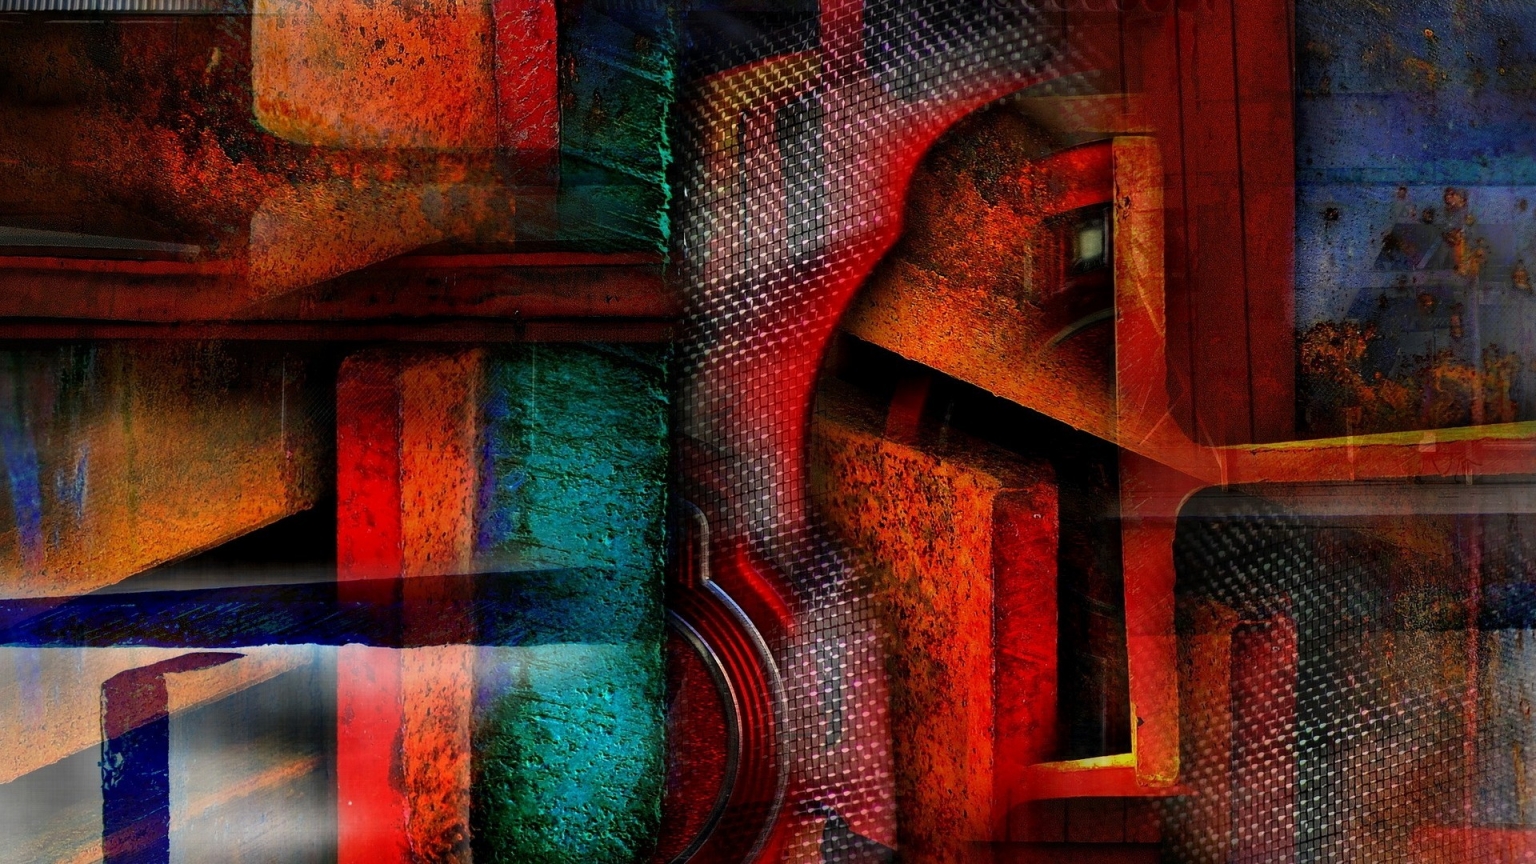 Abstract Grunge Art for 1536 x 864 HDTV resolution